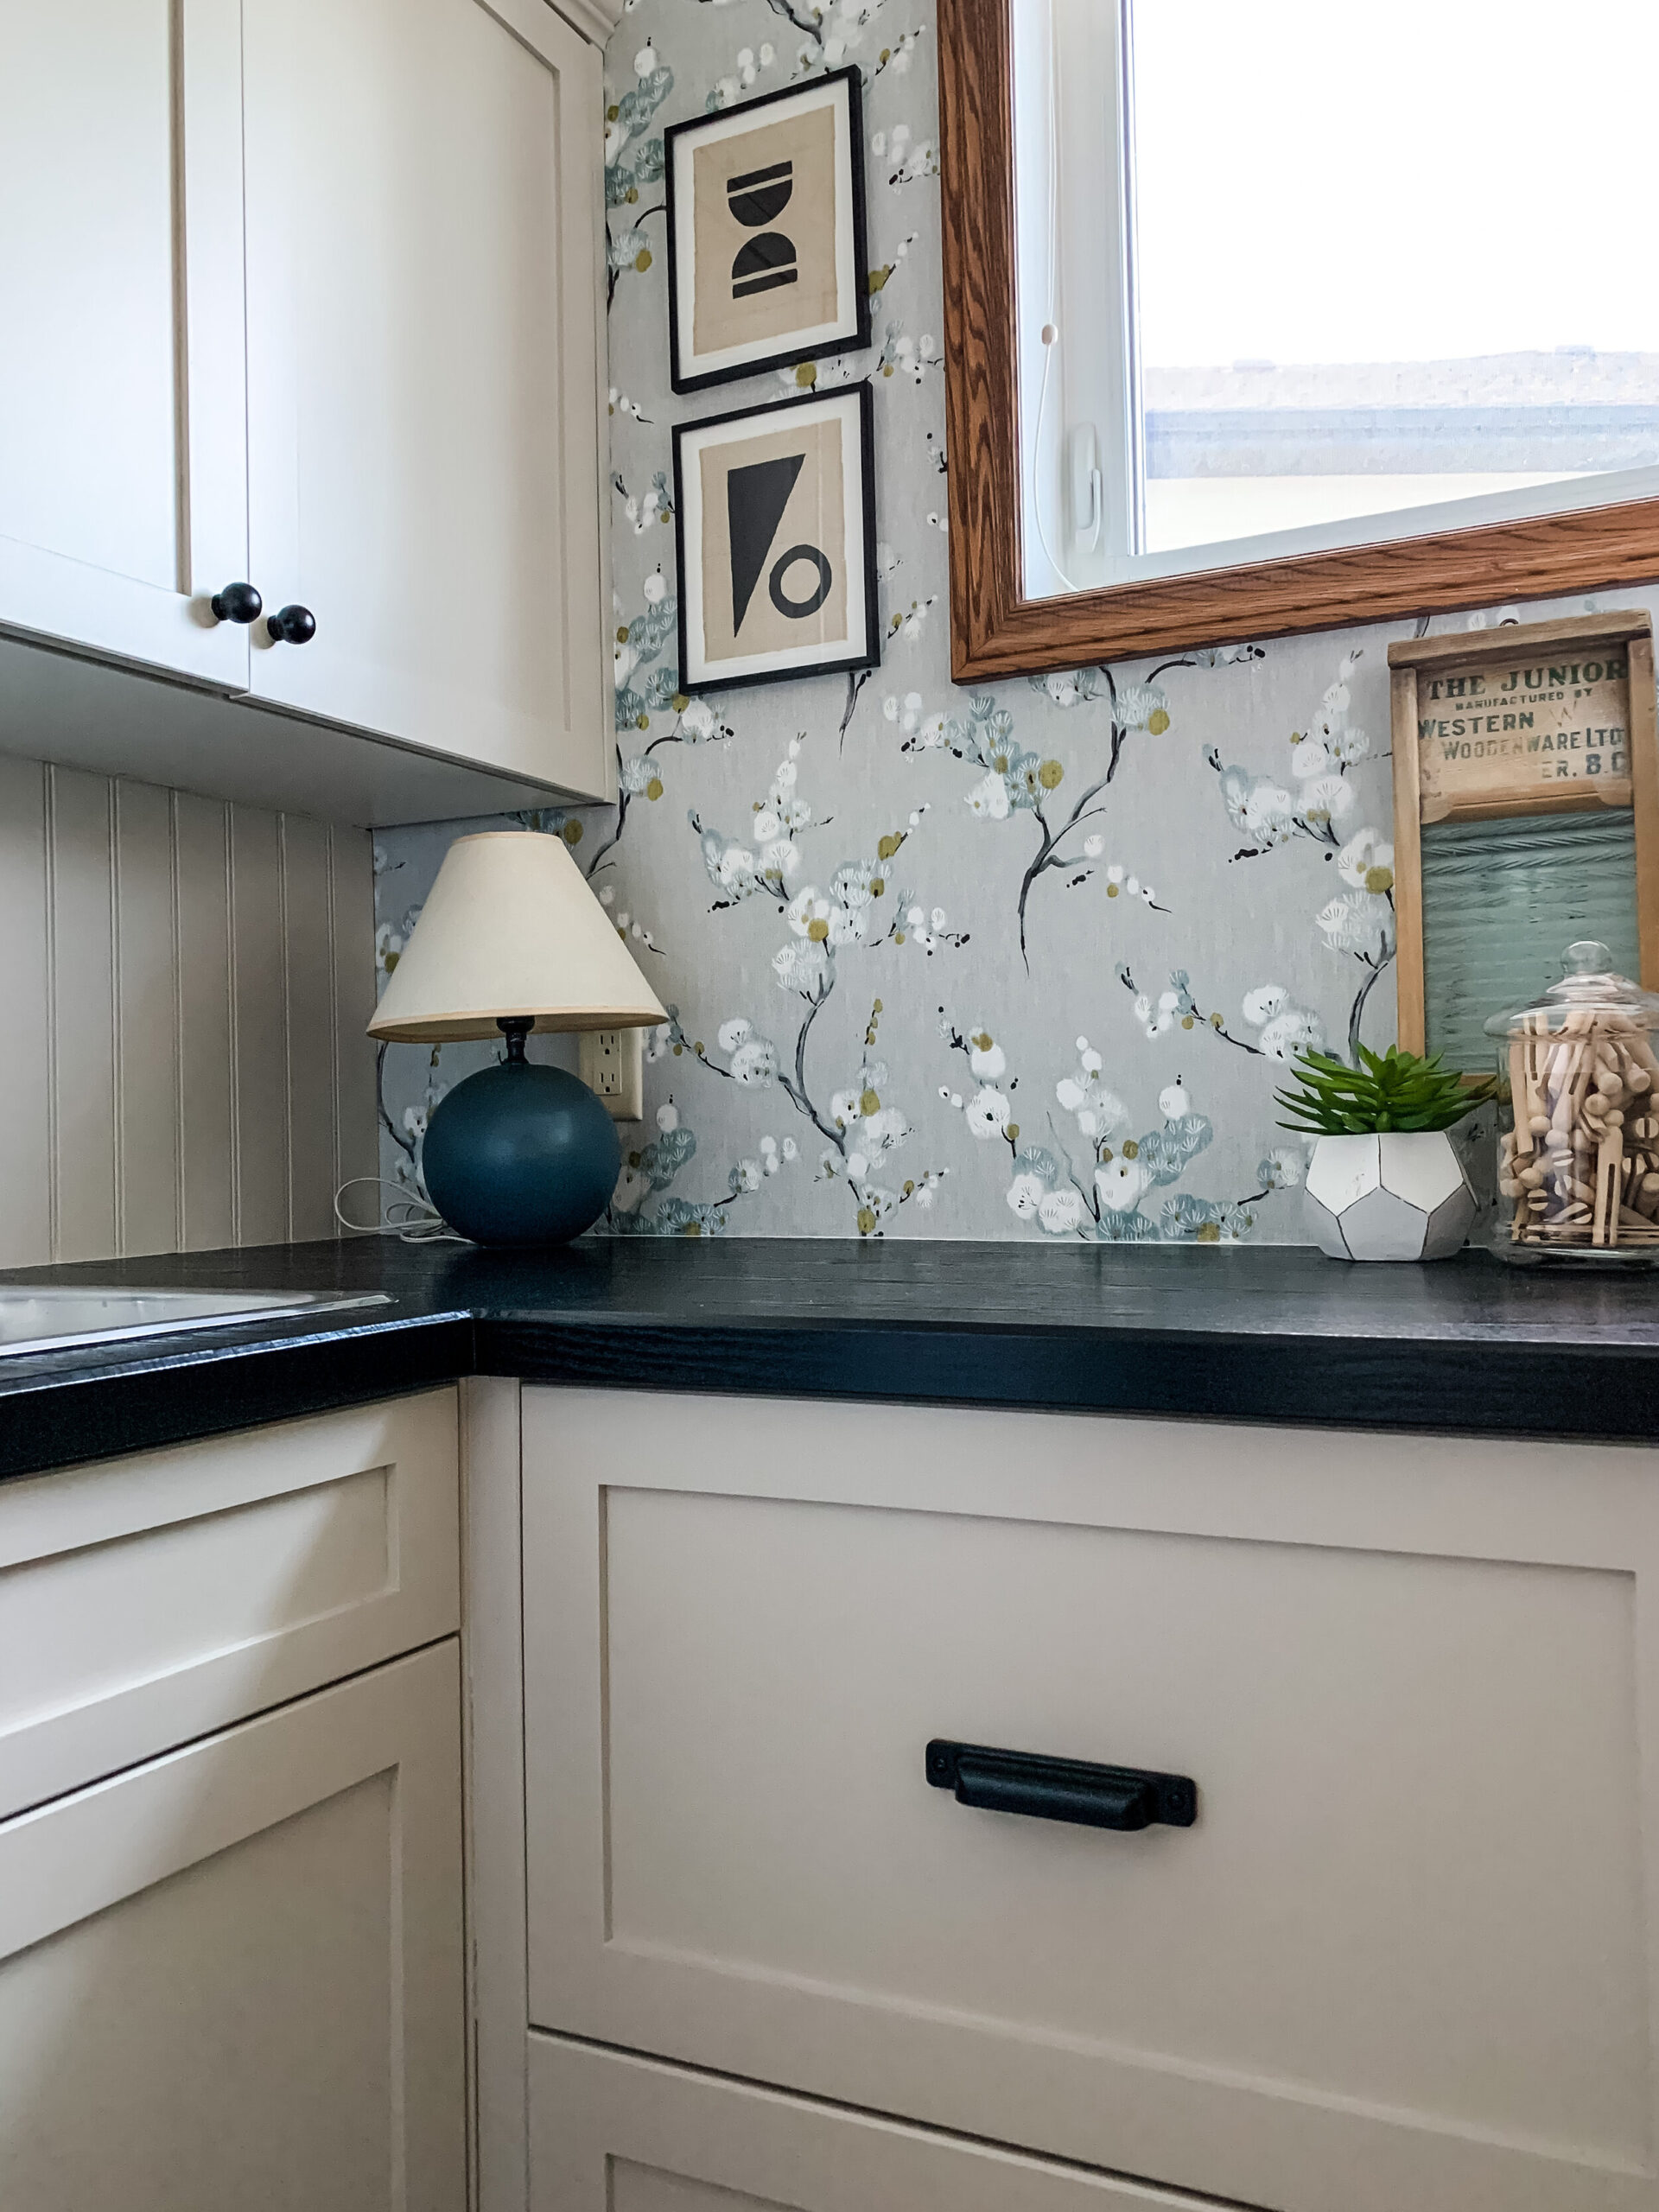 beige cabinets with black counters, floral grey wallpaper, small blue lam, modern art, some styling pieces on counter